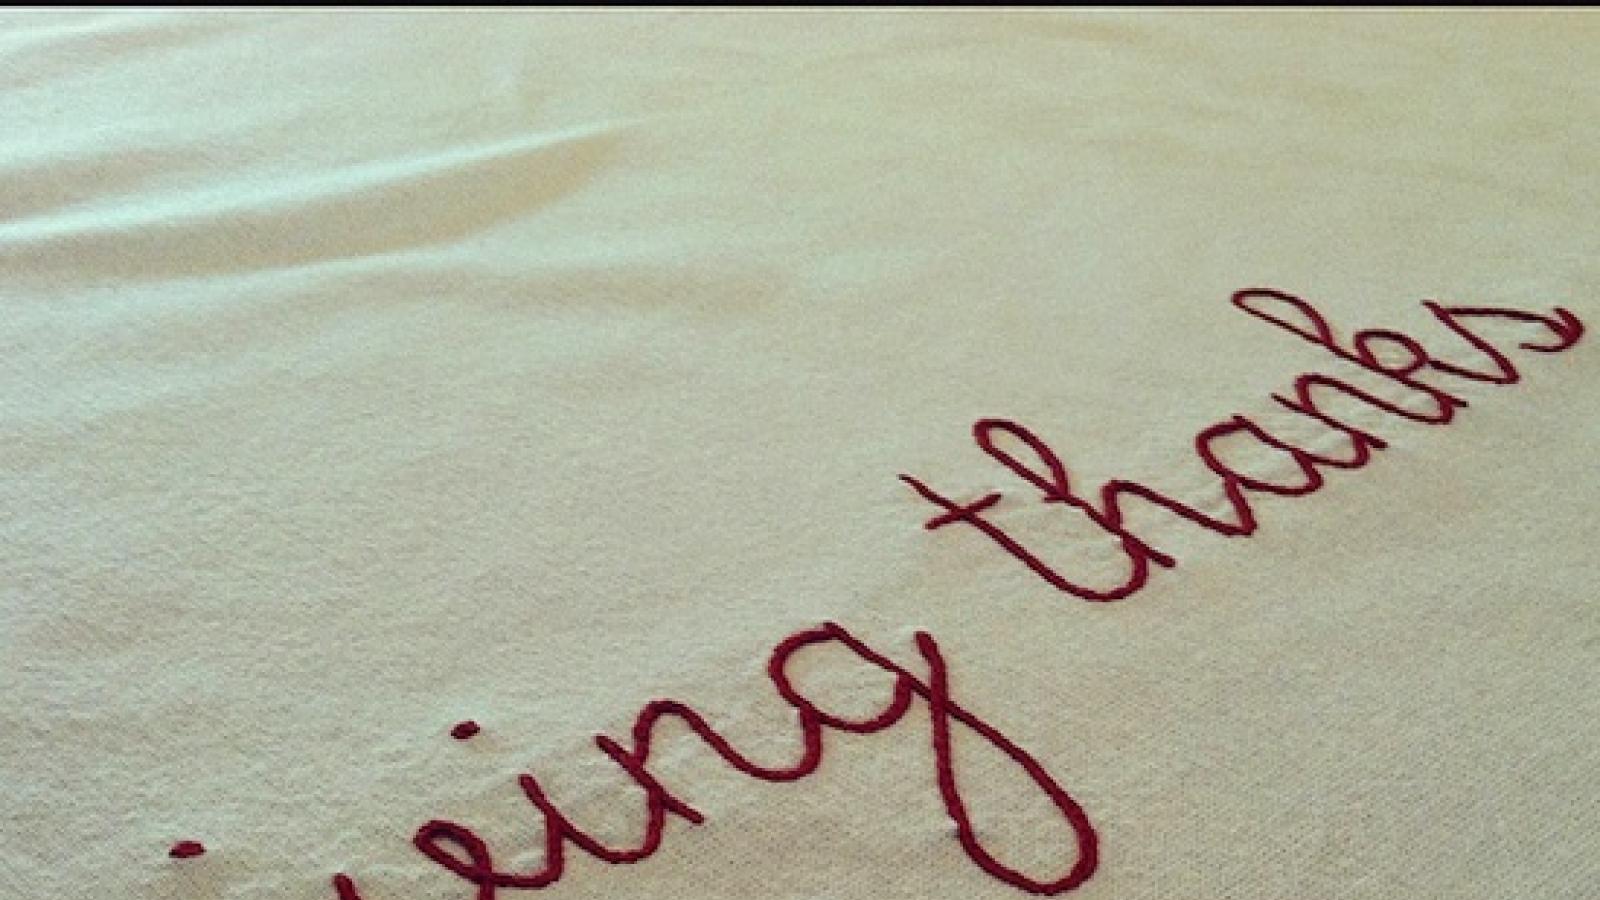 The phrase "giving thanks" embroidered in red thread on a white background